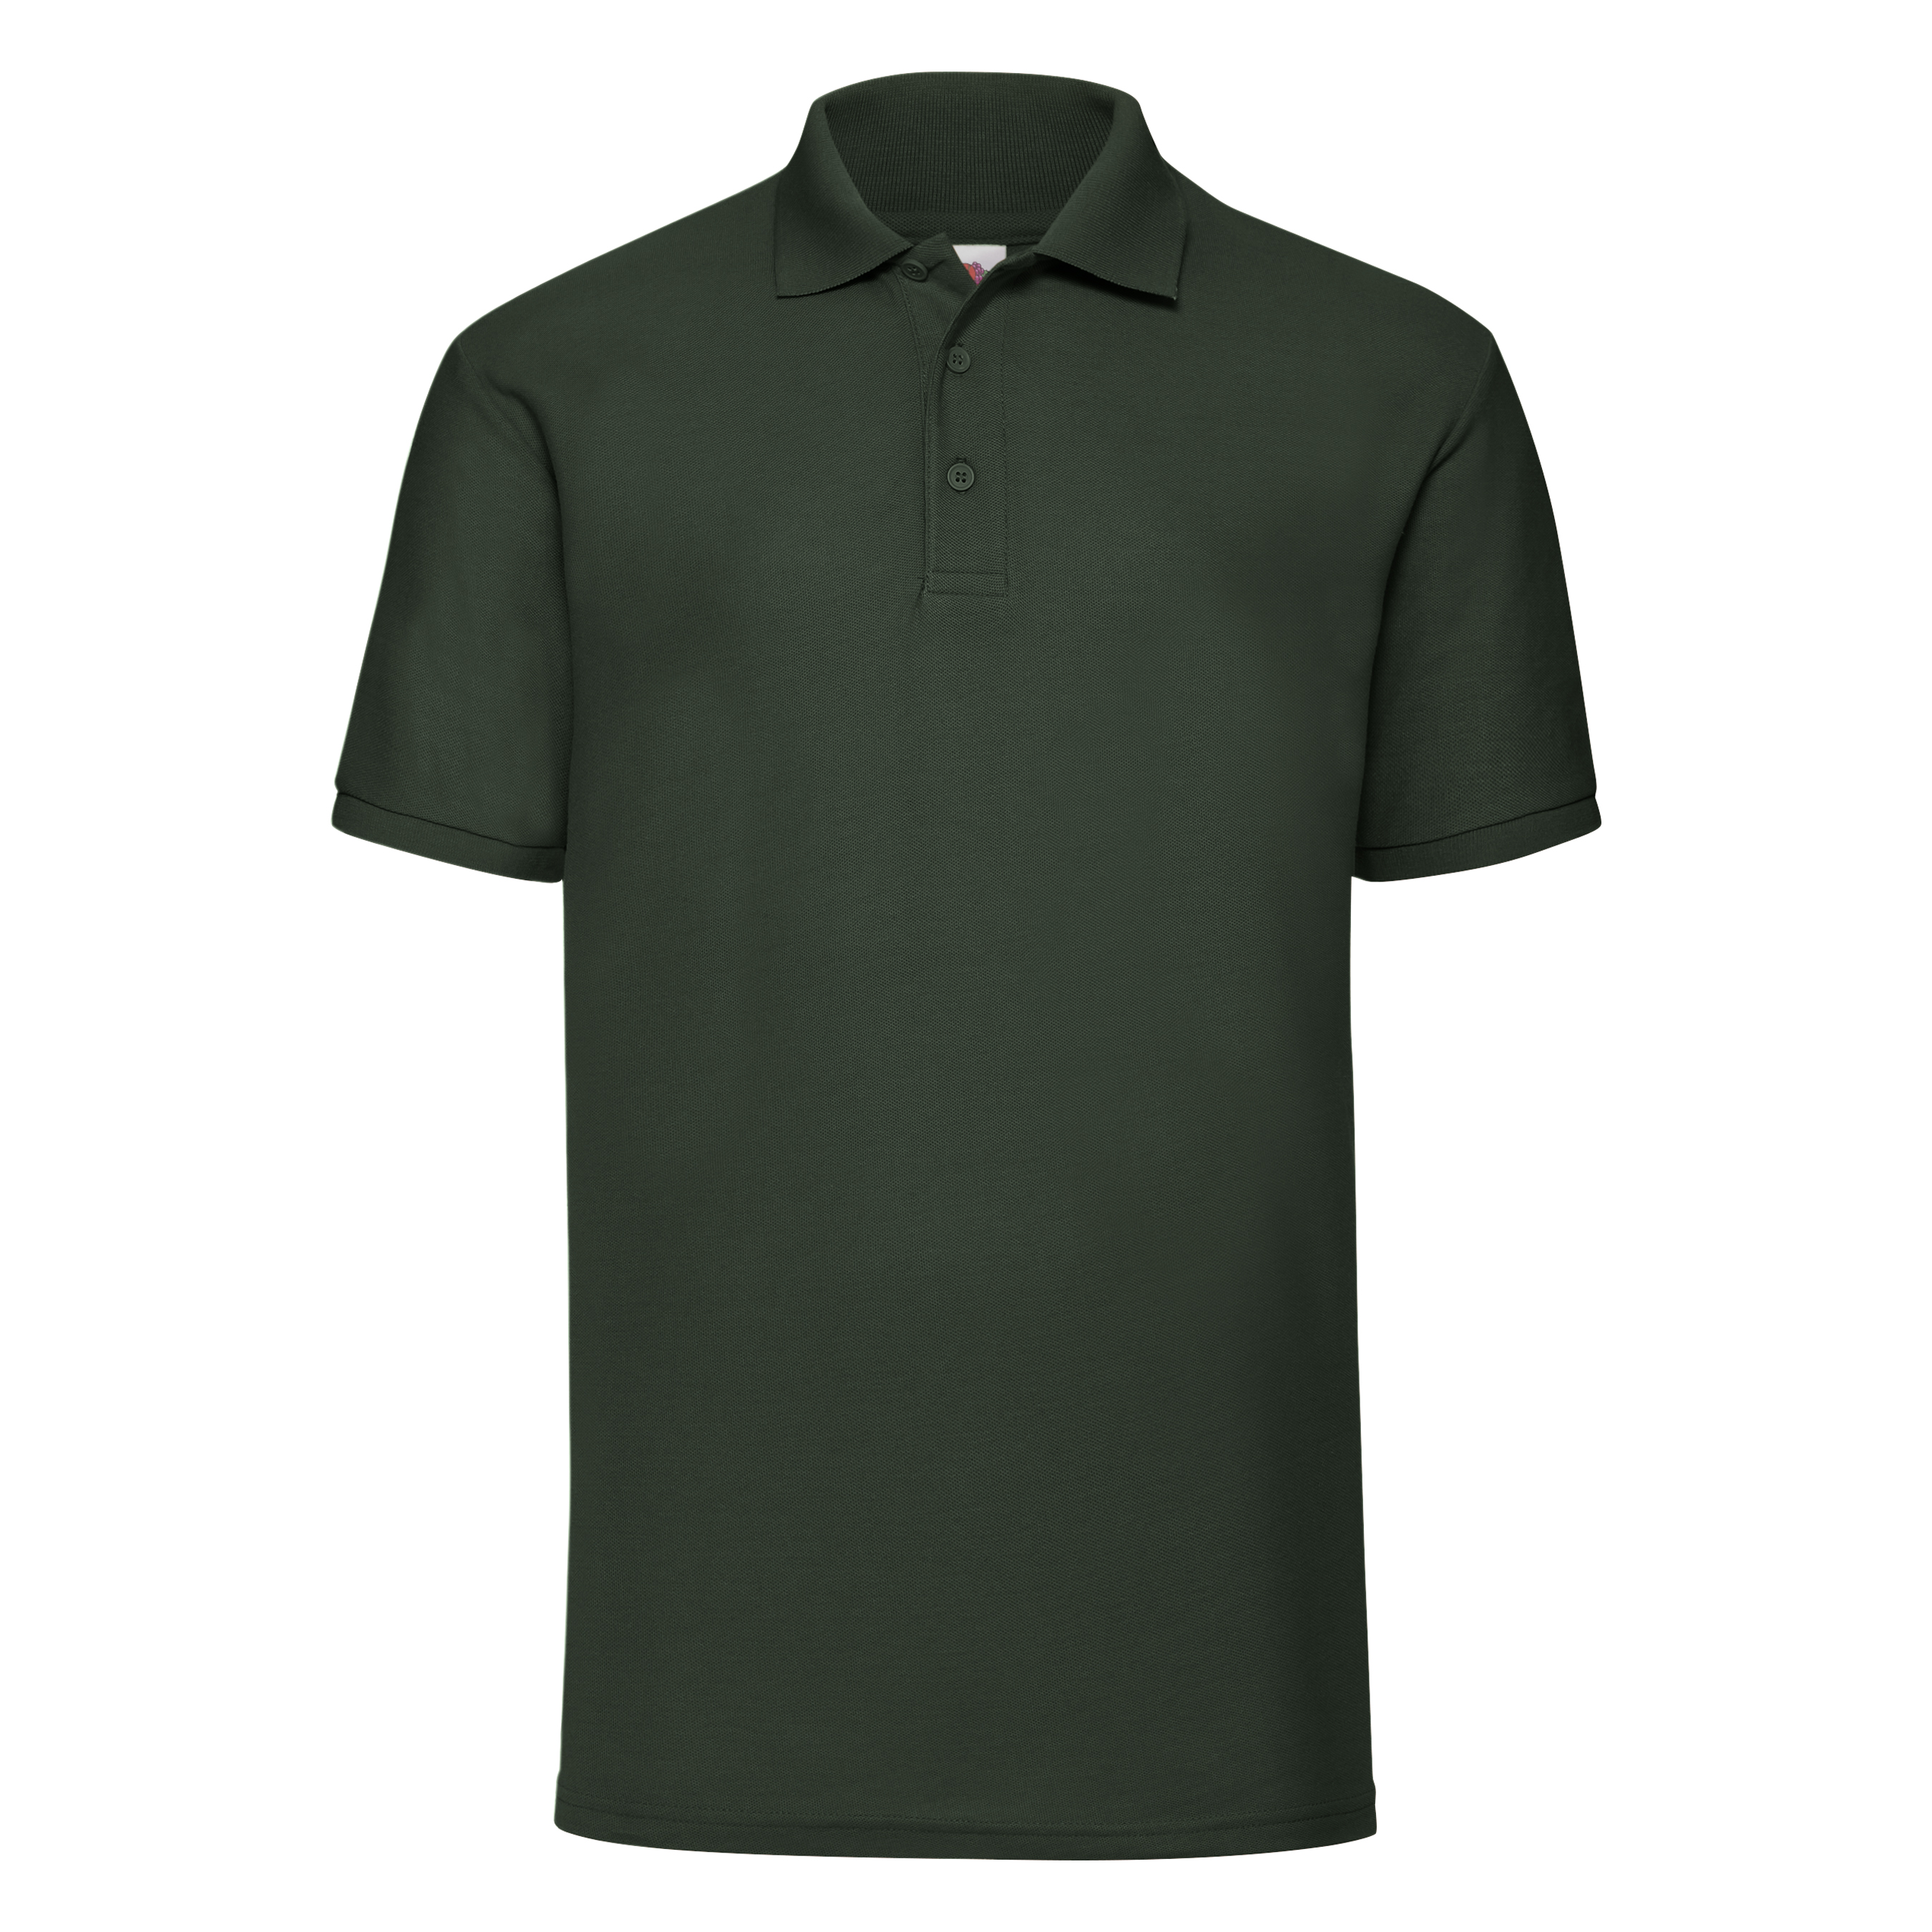 ax-httpswebsystems.s3.amazonaws.comtmp_for_downloadfruit-of-the-loom-65-35-polo-bottle-green.jpg